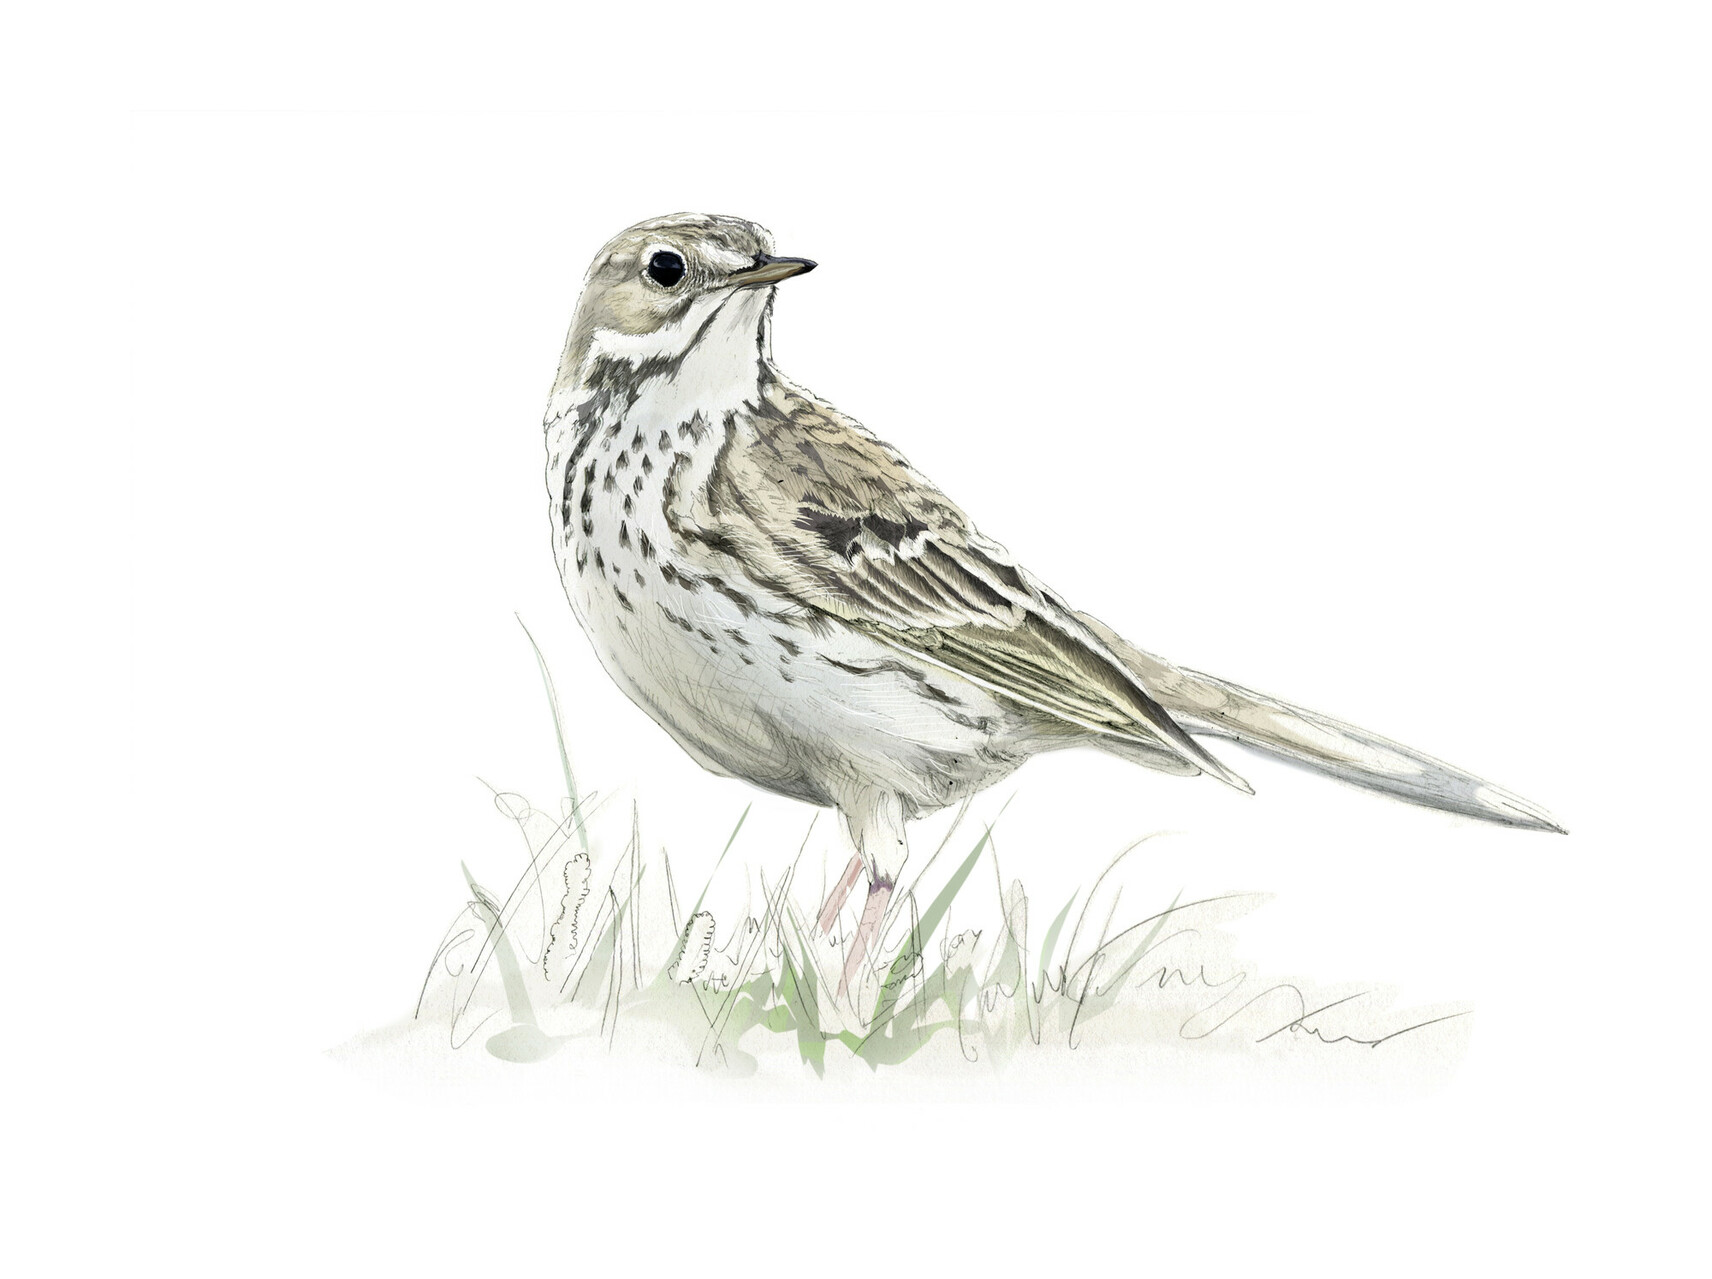 Meadow pipit illustration by Nick Ellwood.